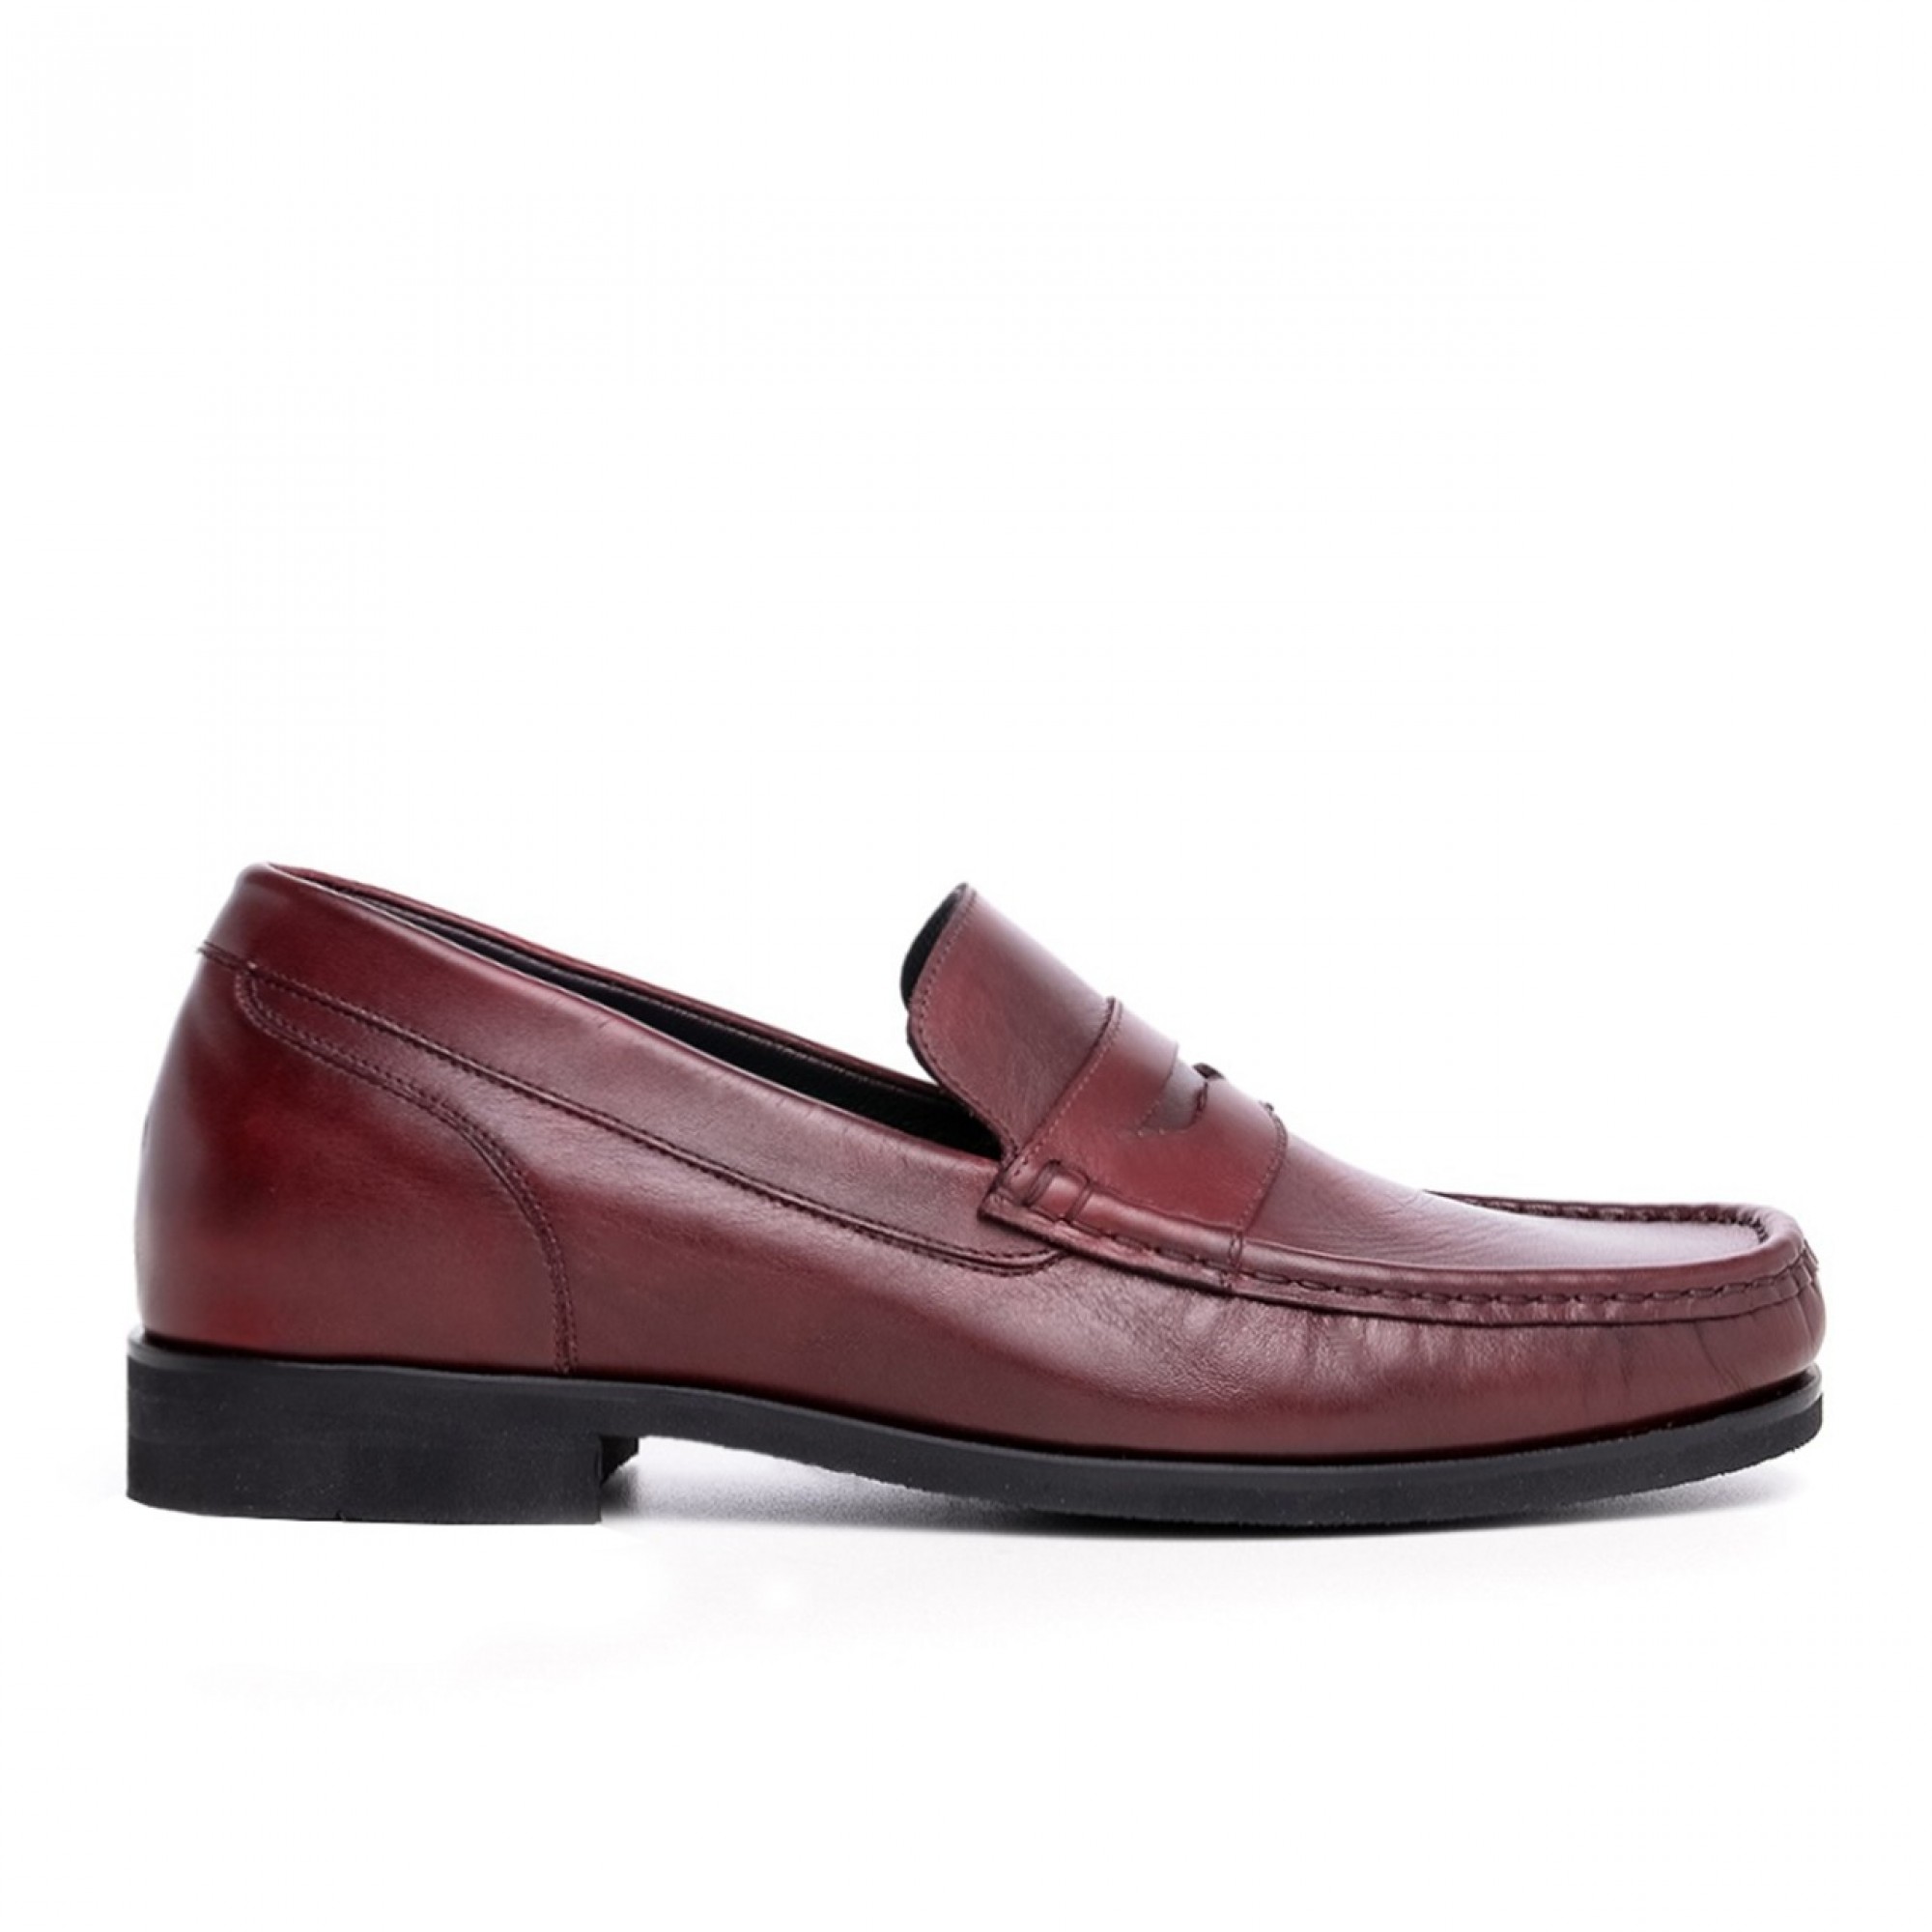 Bari - Elevator Loafers in Full Grain Leather up to 2.6 inches